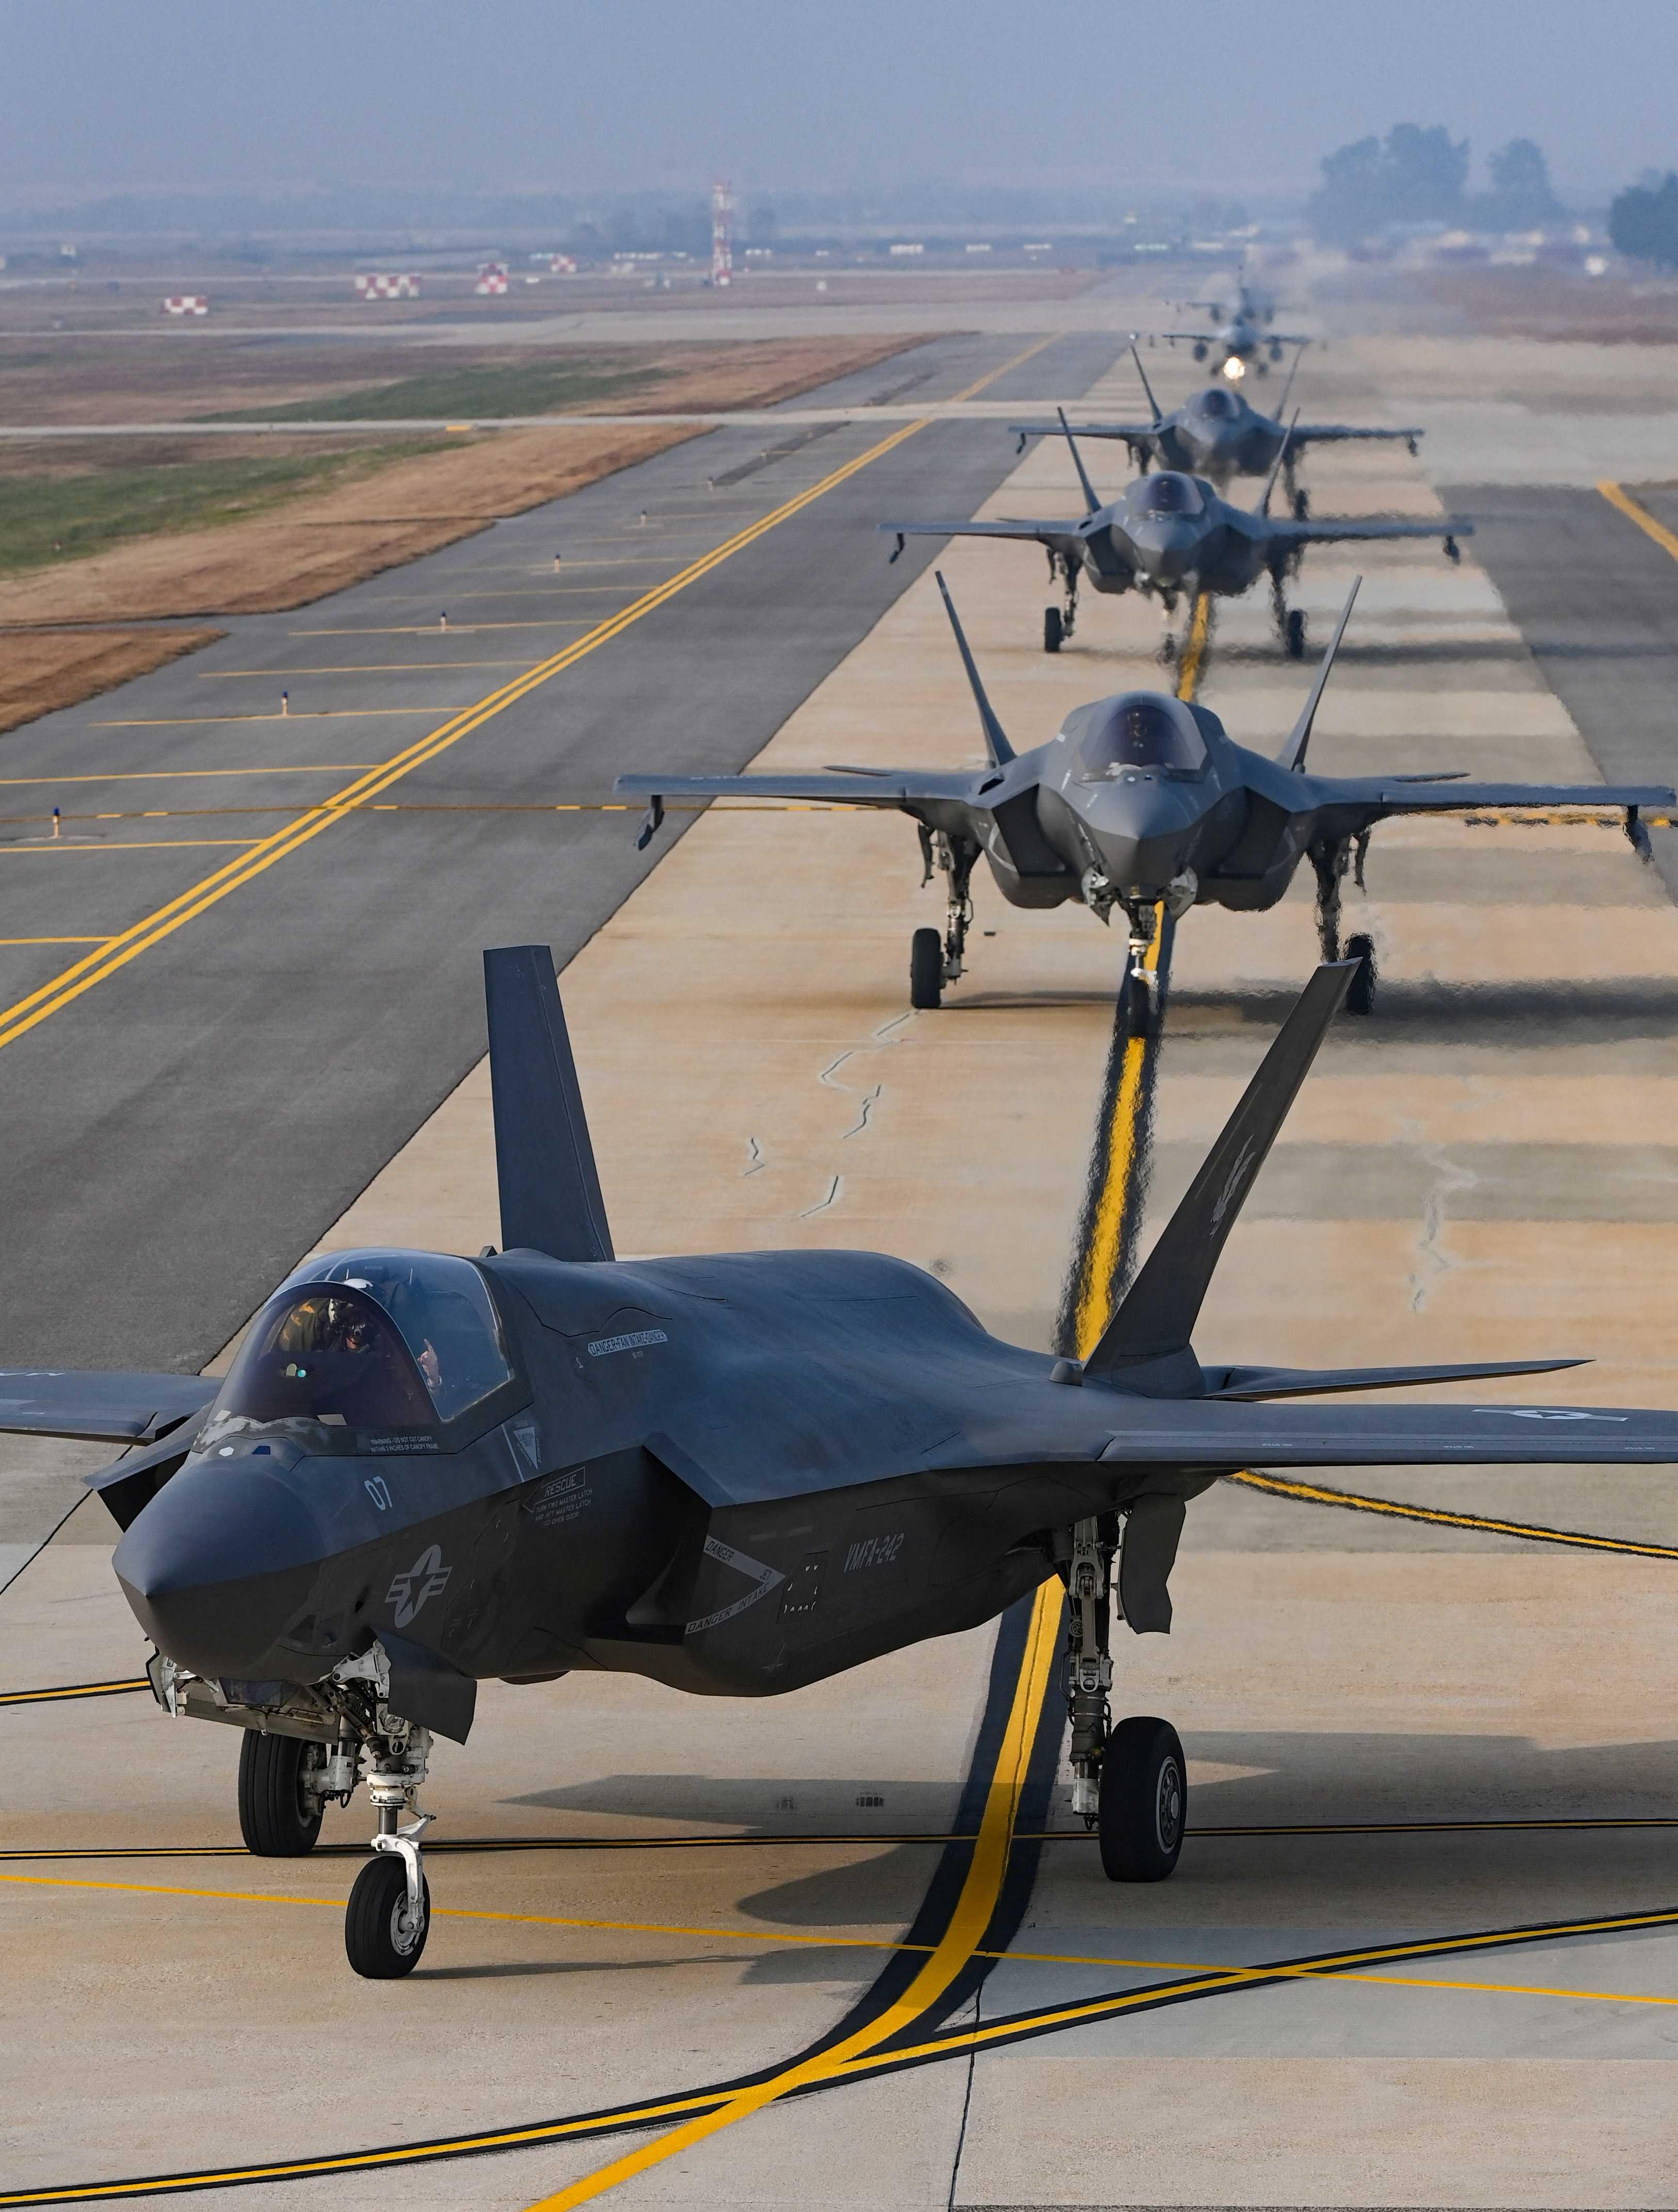 US Airforce' F-35B fighter jets take part in Vigilant Storm joint air drills South Korean and US at an airbase in Gunsan, South Korea, Nov 2. Photo: Reuters